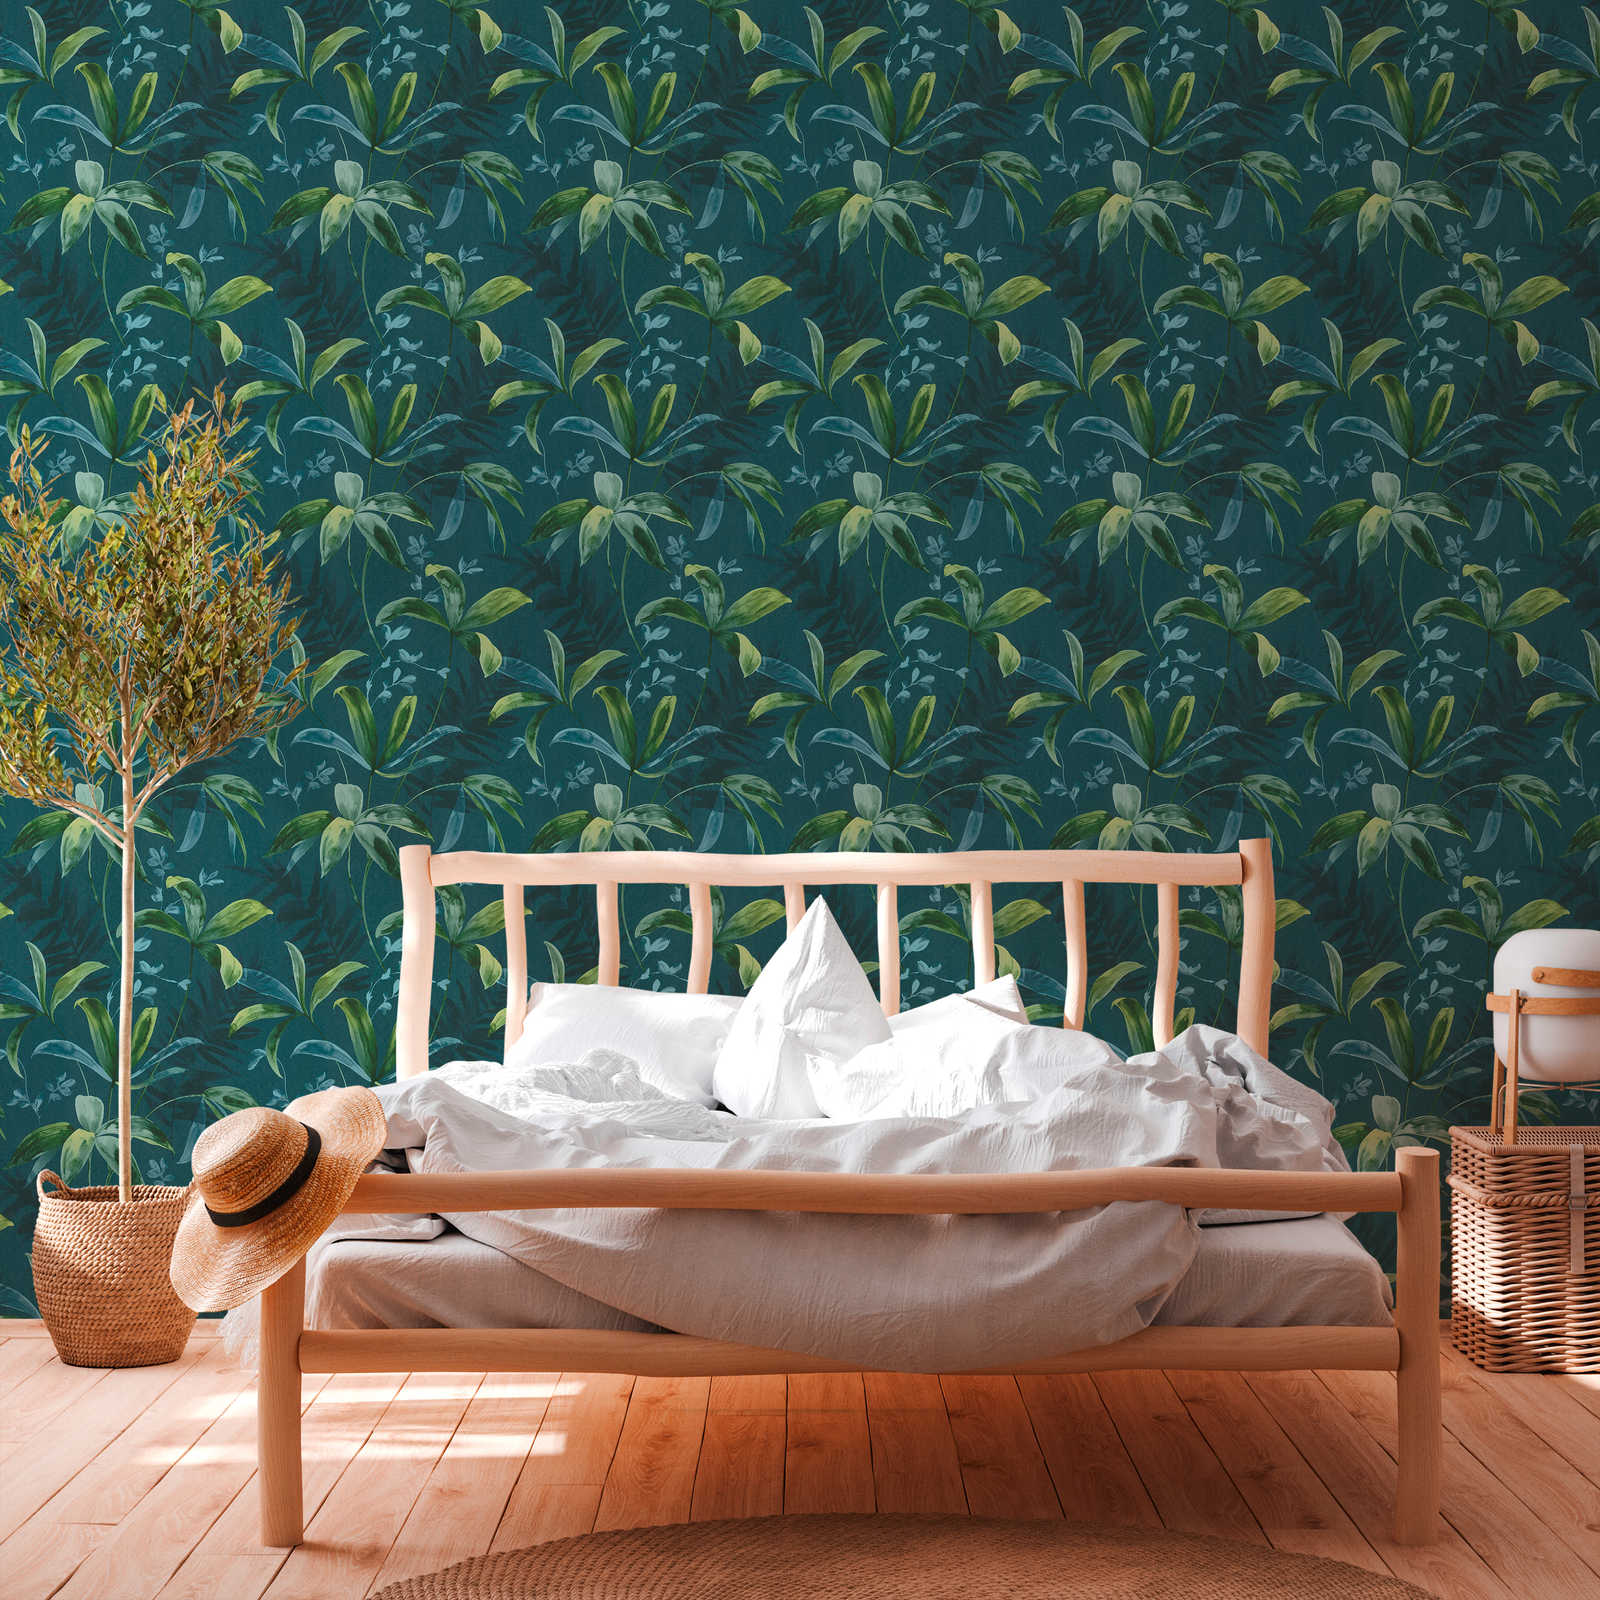             Dark green wallpaper with leaves pattern in watercolour style - blue, green
        